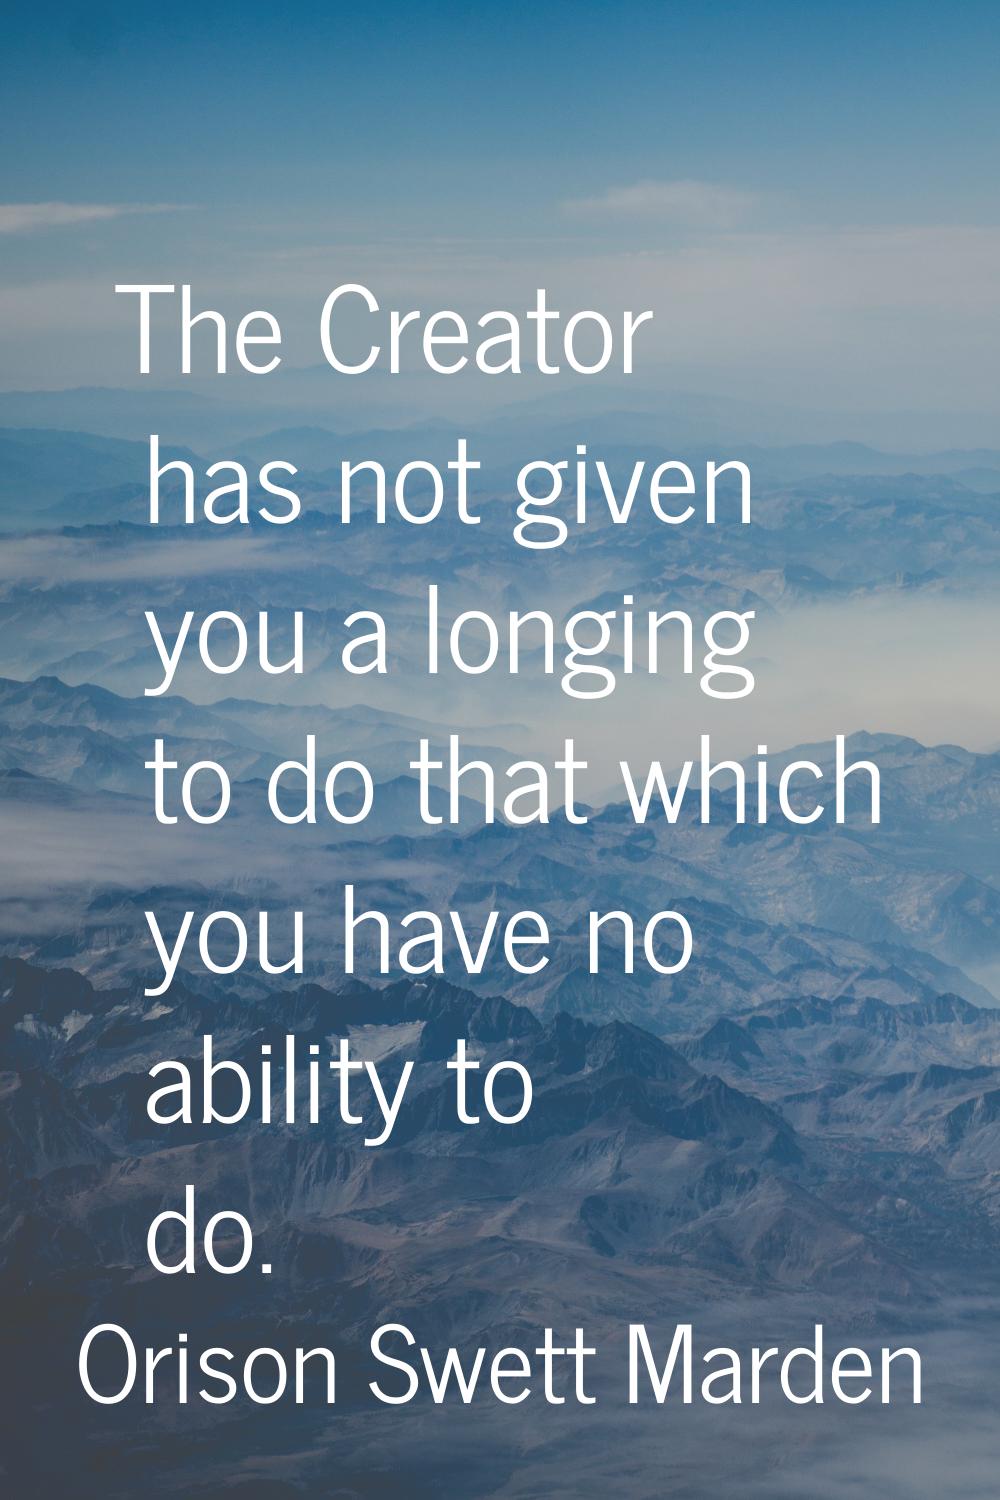 The Creator has not given you a longing to do that which you have no ability to do.